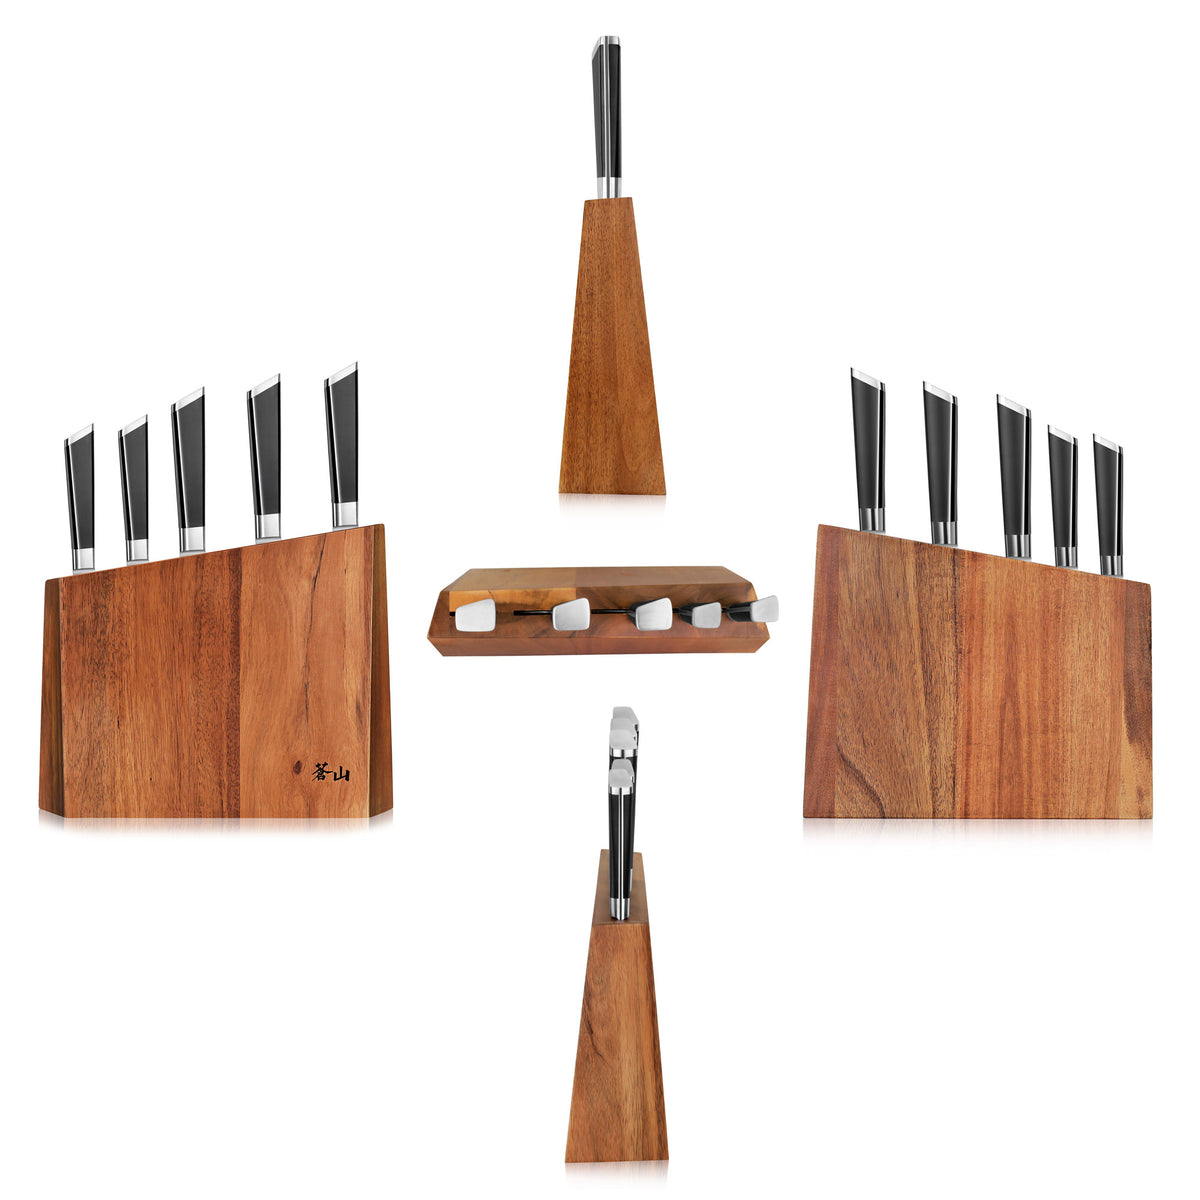 S1 Series 6-Piece German Steel Forged Knife Block Set, Forged German S – Cangshan  Cutlery Company